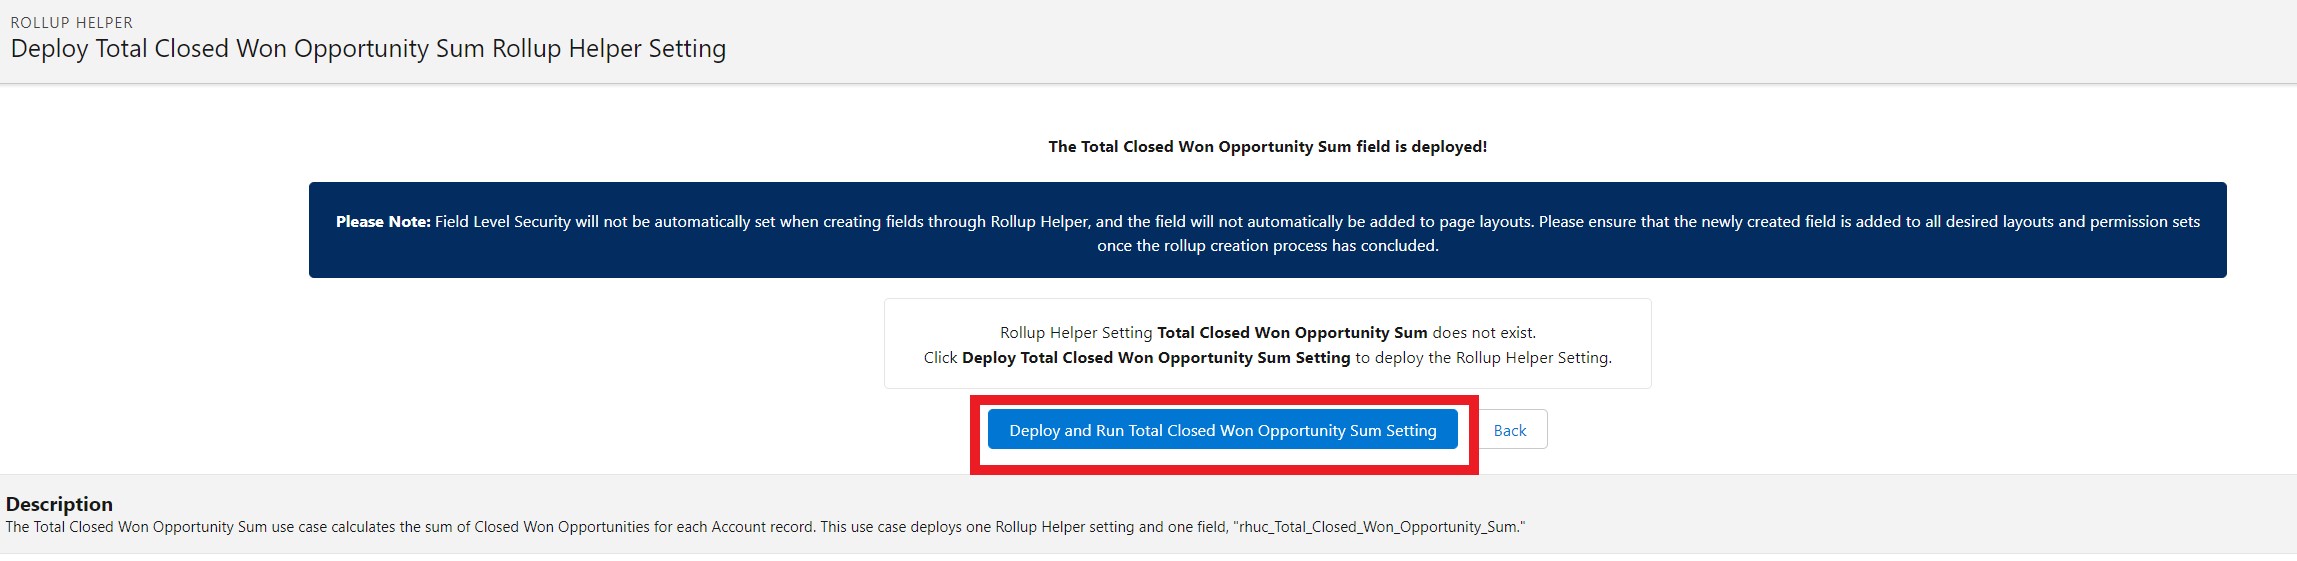 Total Closed Won Opportunity Sum deploy setting